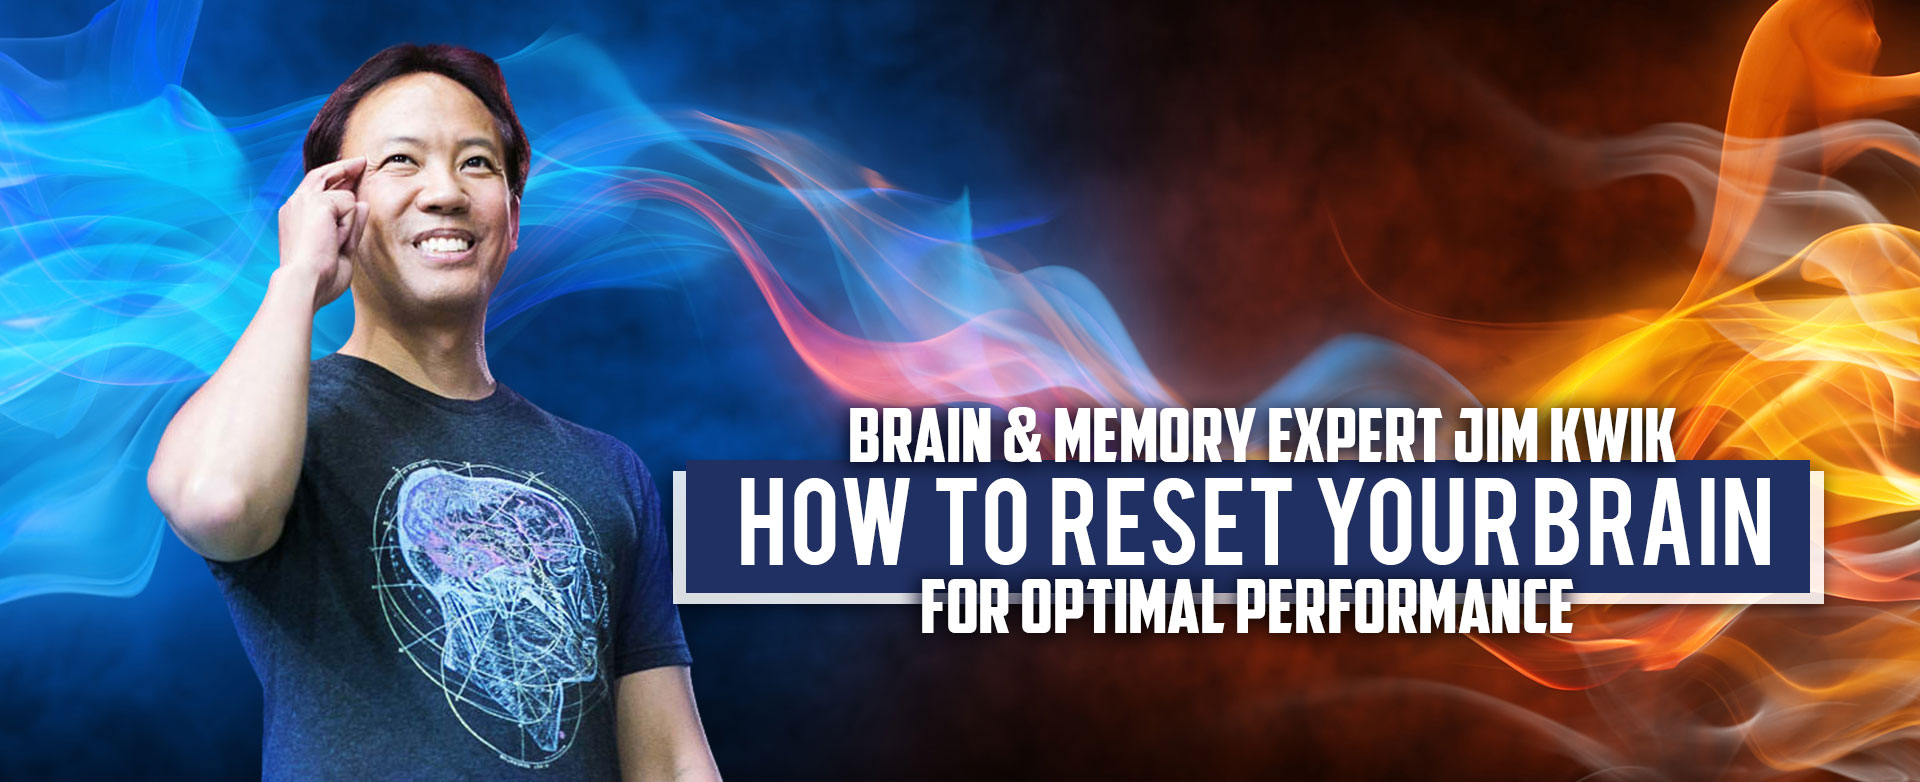 MyPatriotsNetwork-How To Reset Your Brain For Optimal Performance